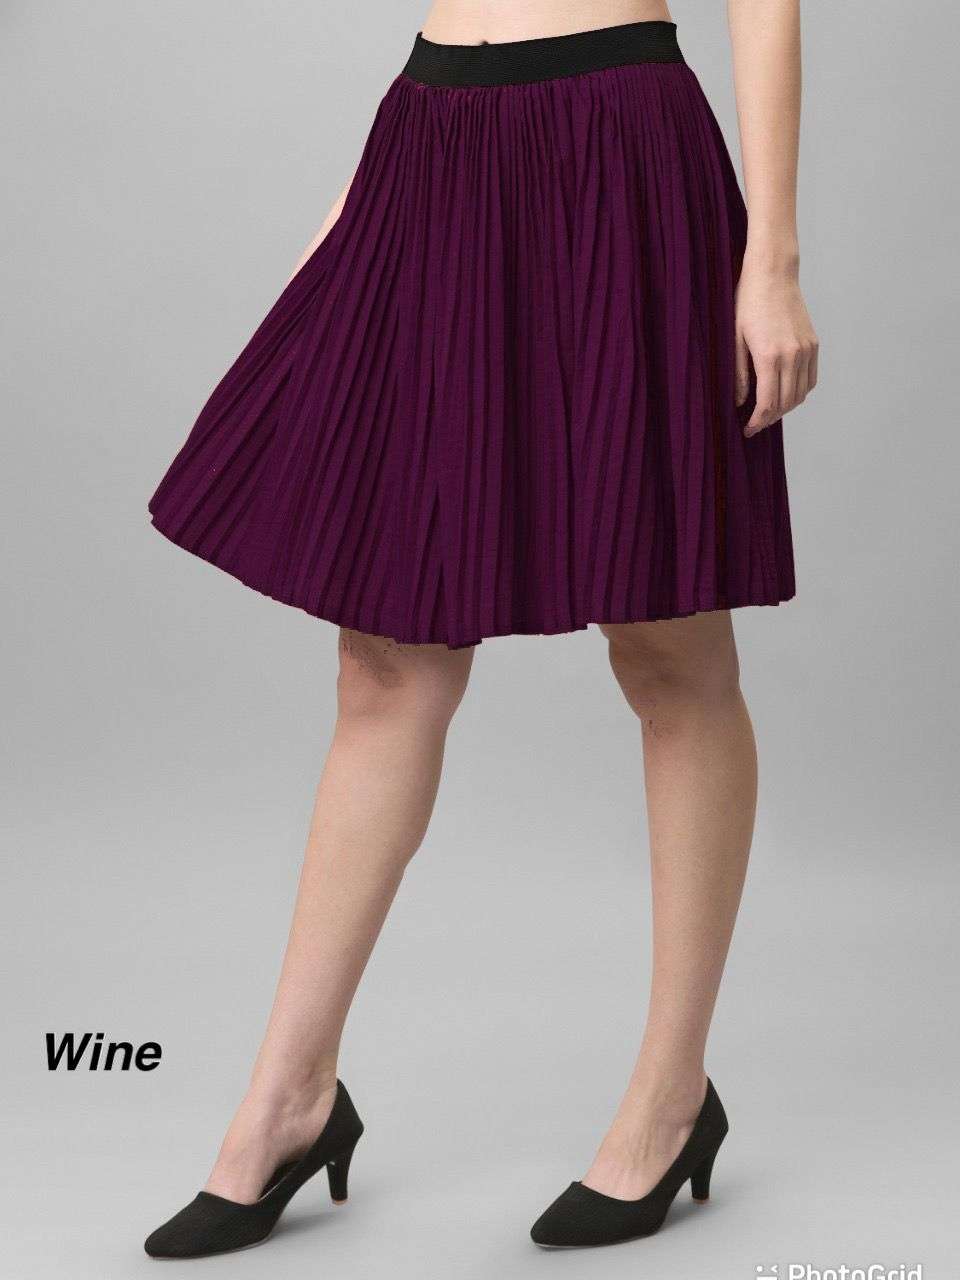 Skirt Short party wear Pleated skirt in 6 colors only skirts free size elastic waist 